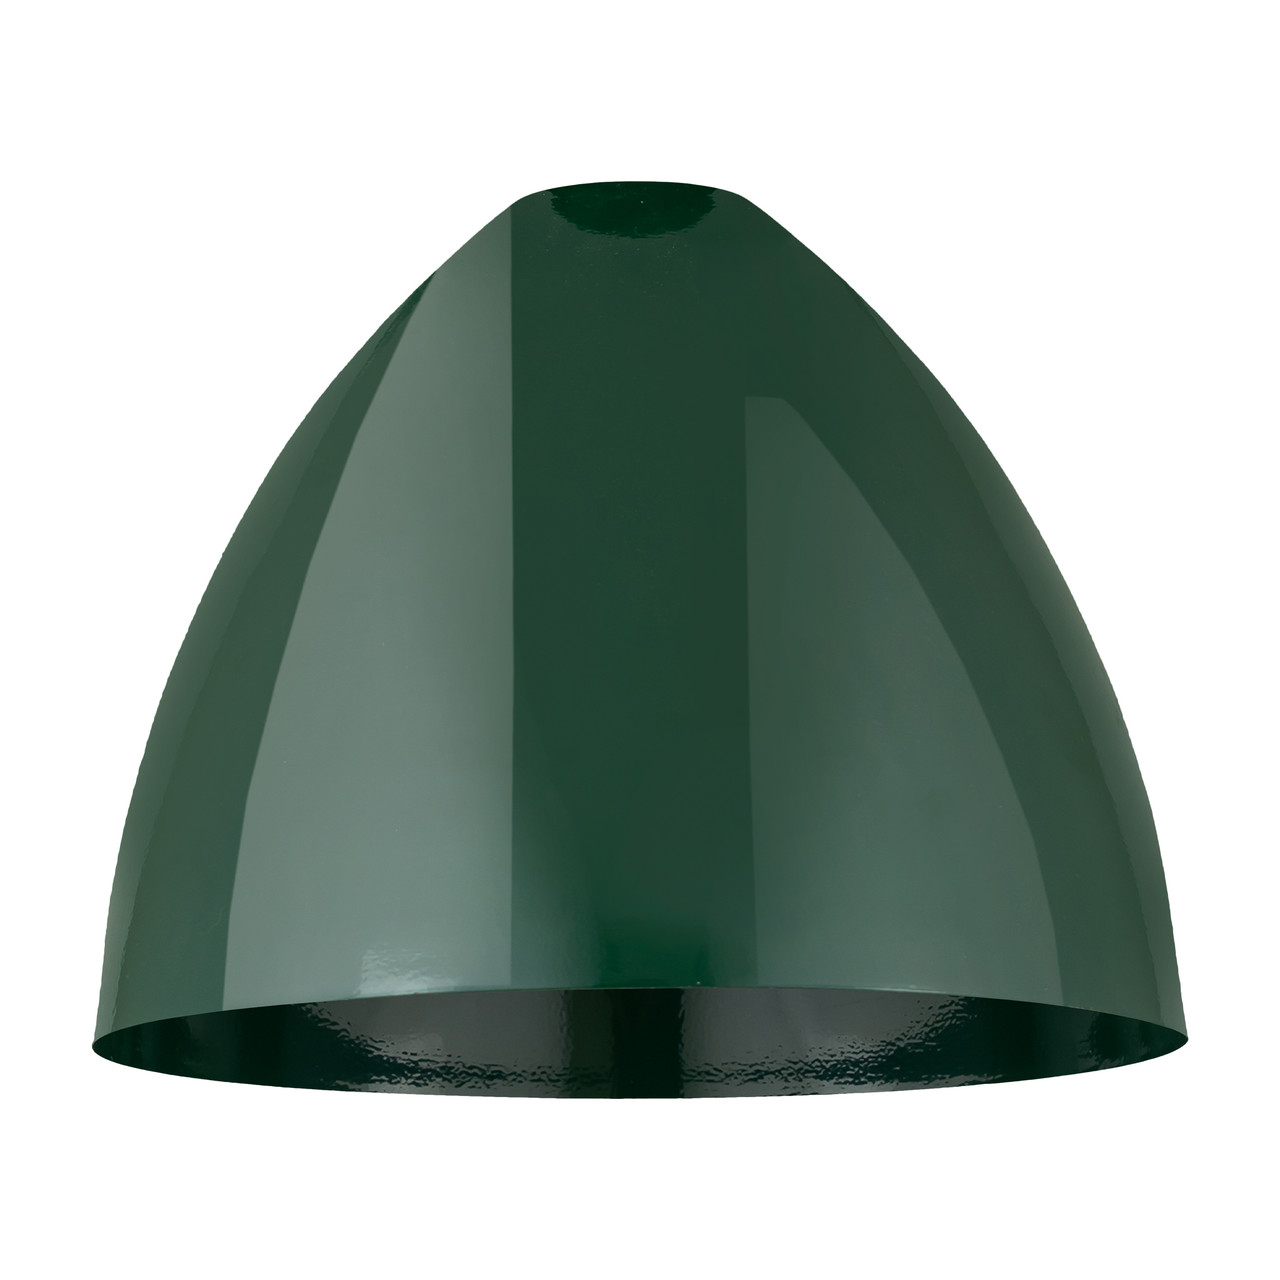 INNOVATIONS MBD-16-GR Plymouth Dome Light 16 inch Green Metal Shade